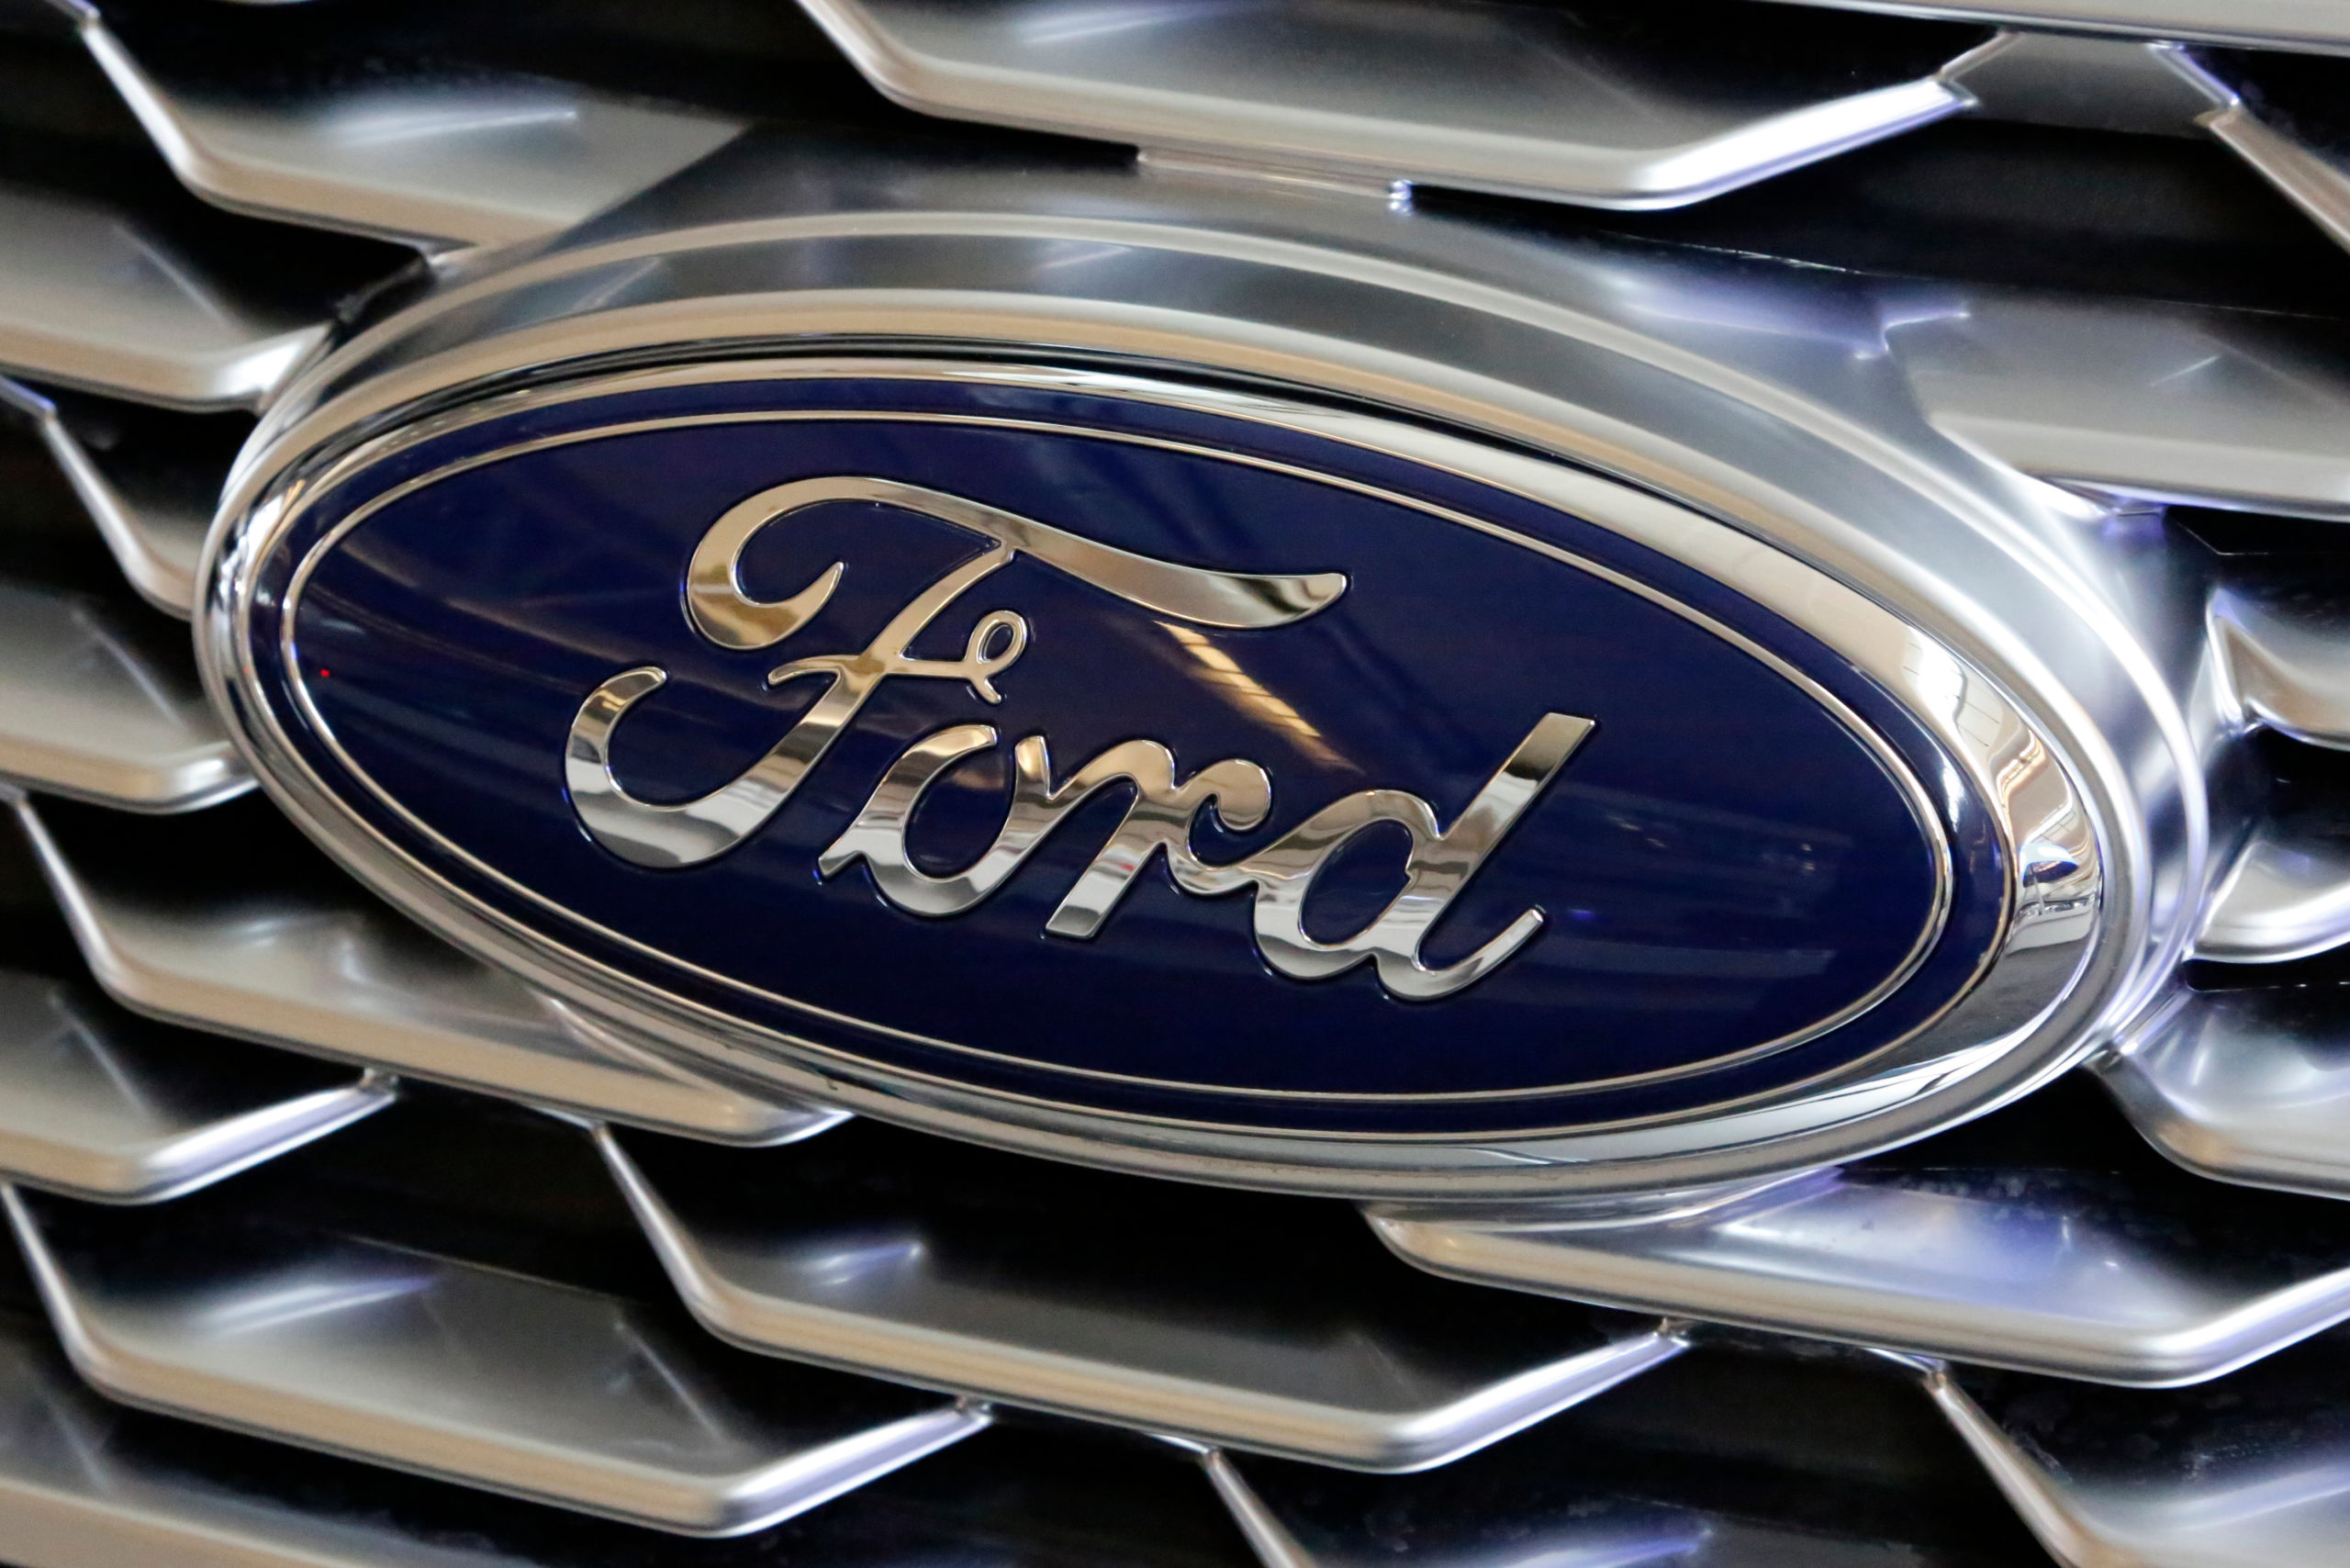 Ford recalls over 700K vehicles; backup cameras can go dark